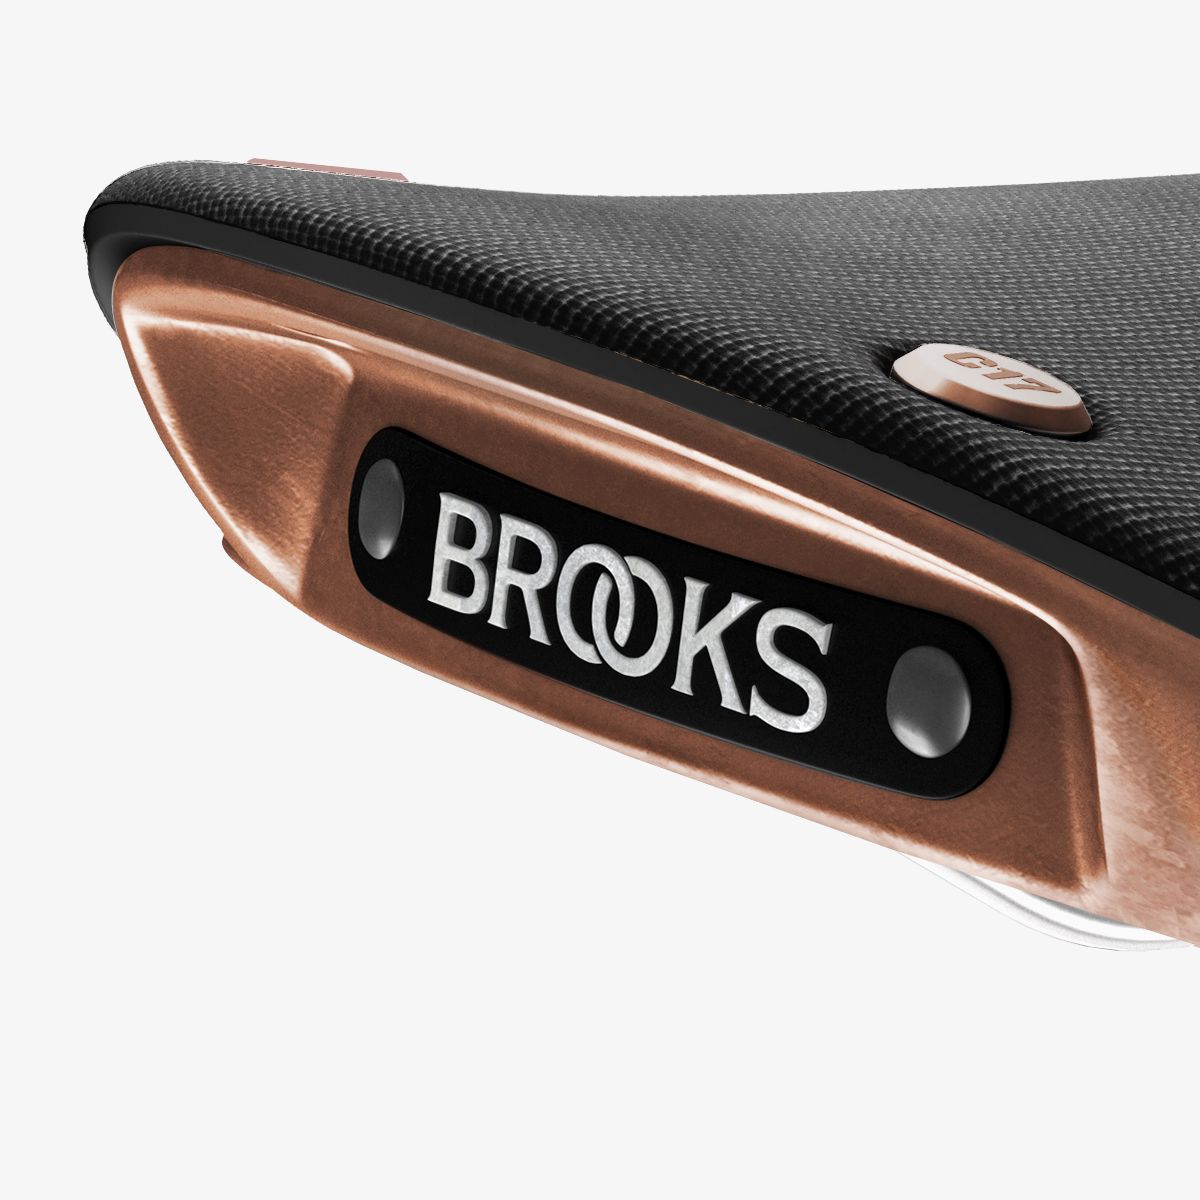 C17 Special Copper, modern cycling saddle - Brooks England 